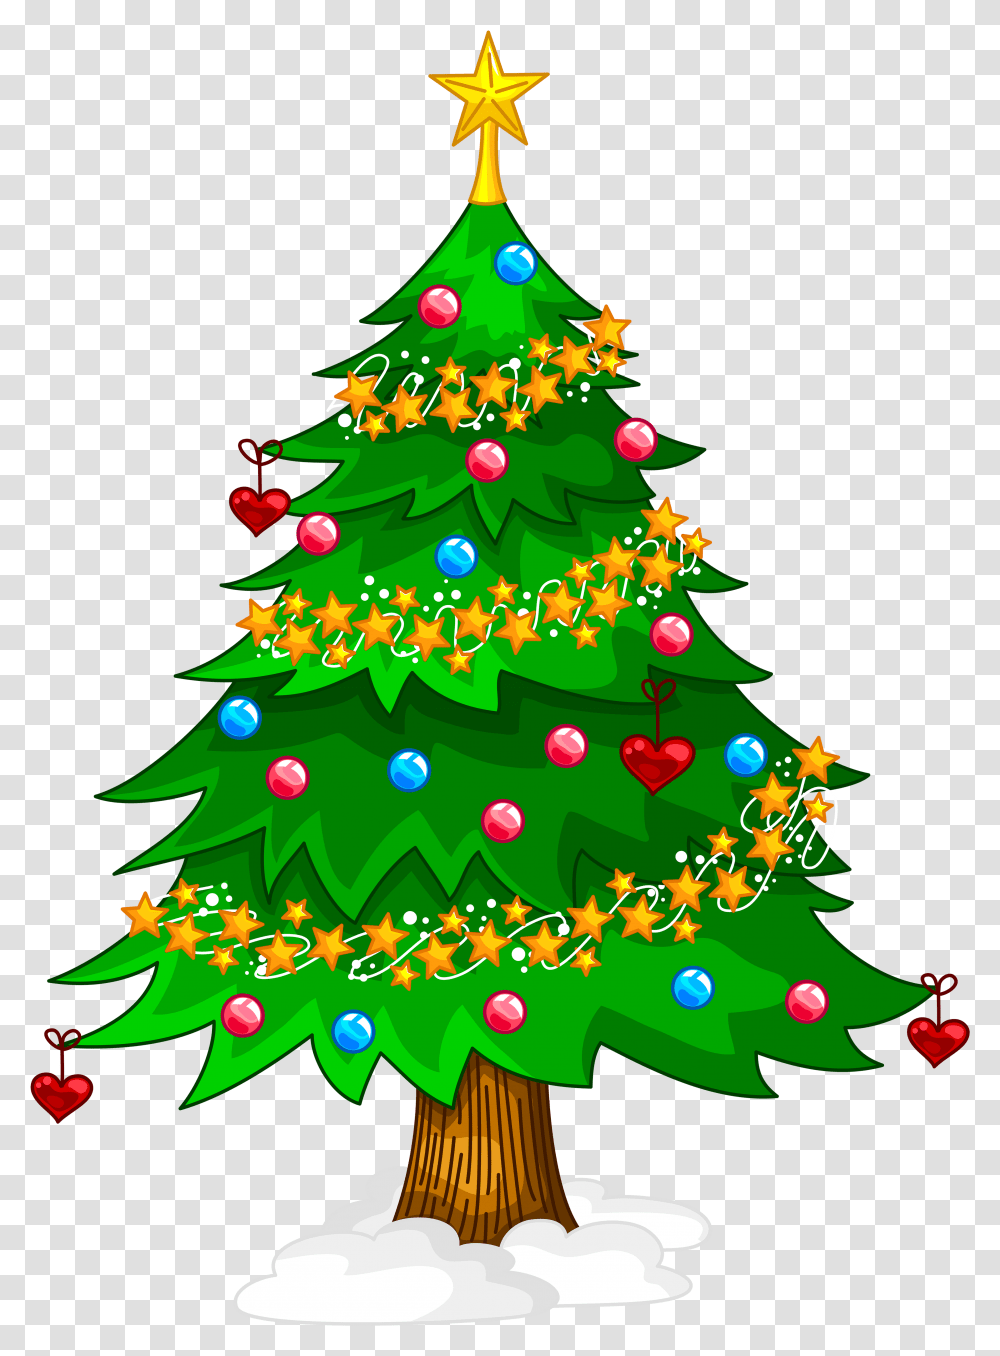 Background Xmas Tree Clipart Christmas Backgrounds, Christmas Tree, Ornament, Plant, Lighting Transparent Png